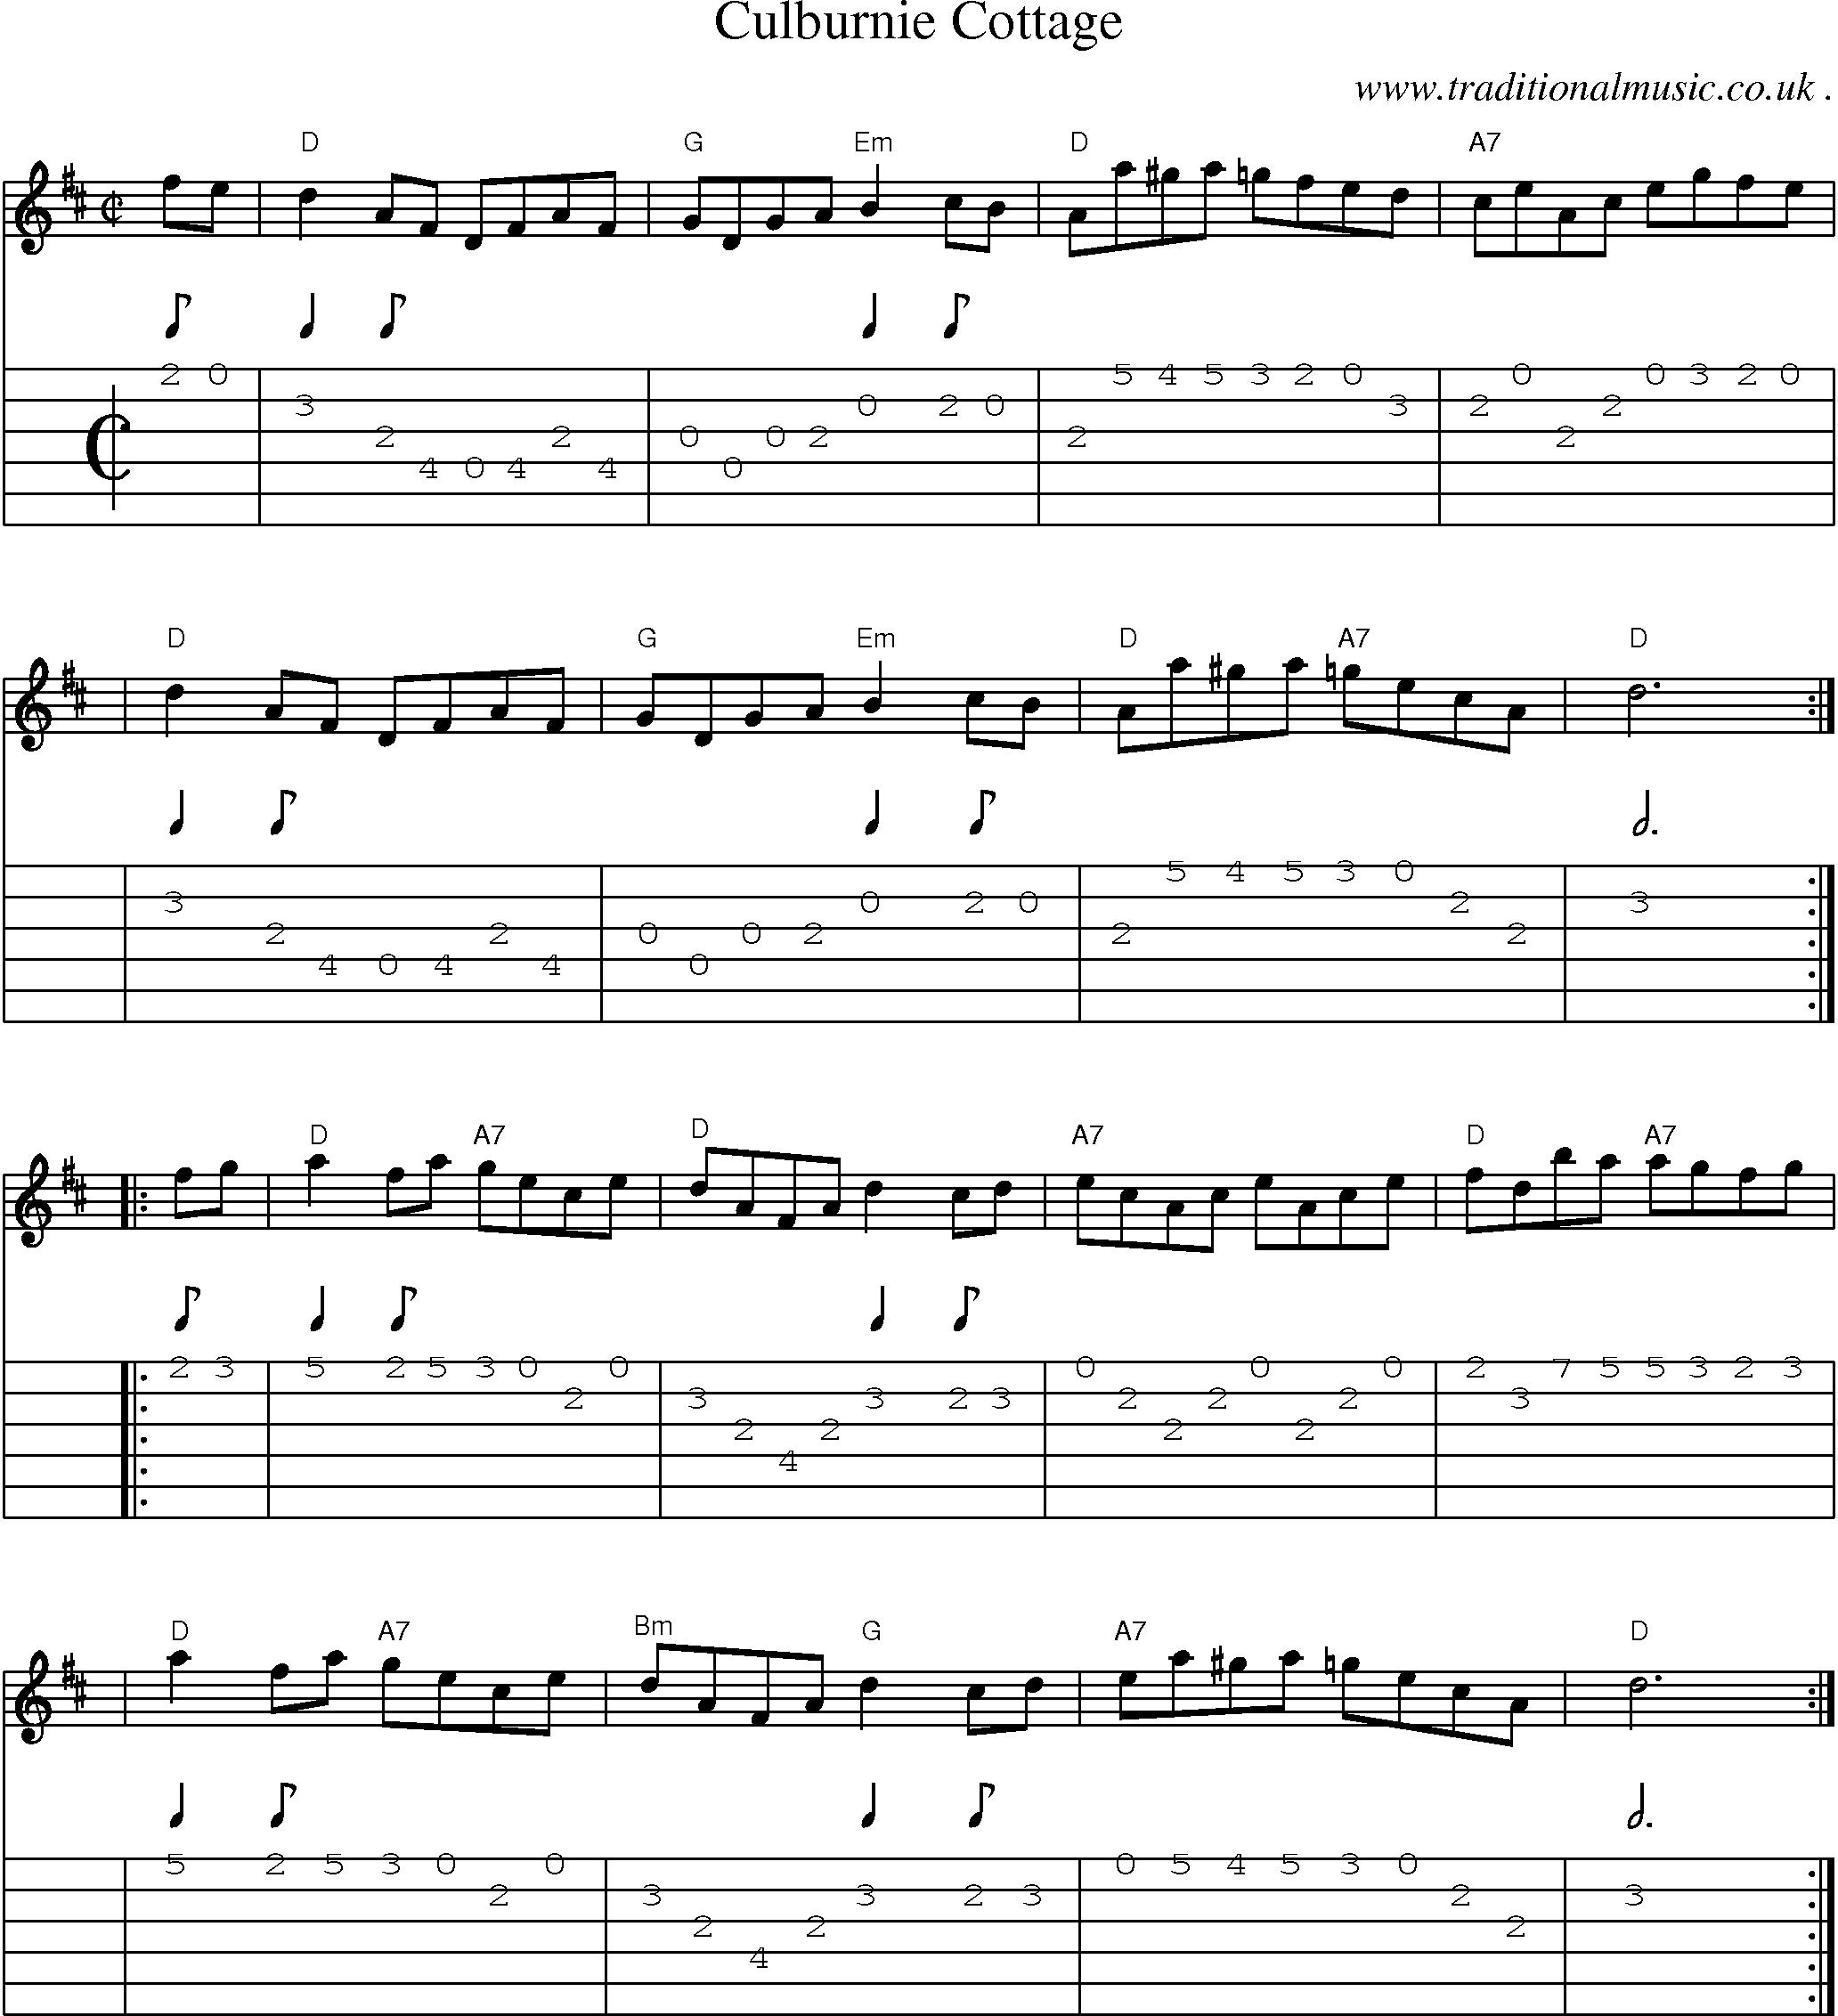 Sheet-music  score, Chords and Guitar Tabs for Culburnie Cottage